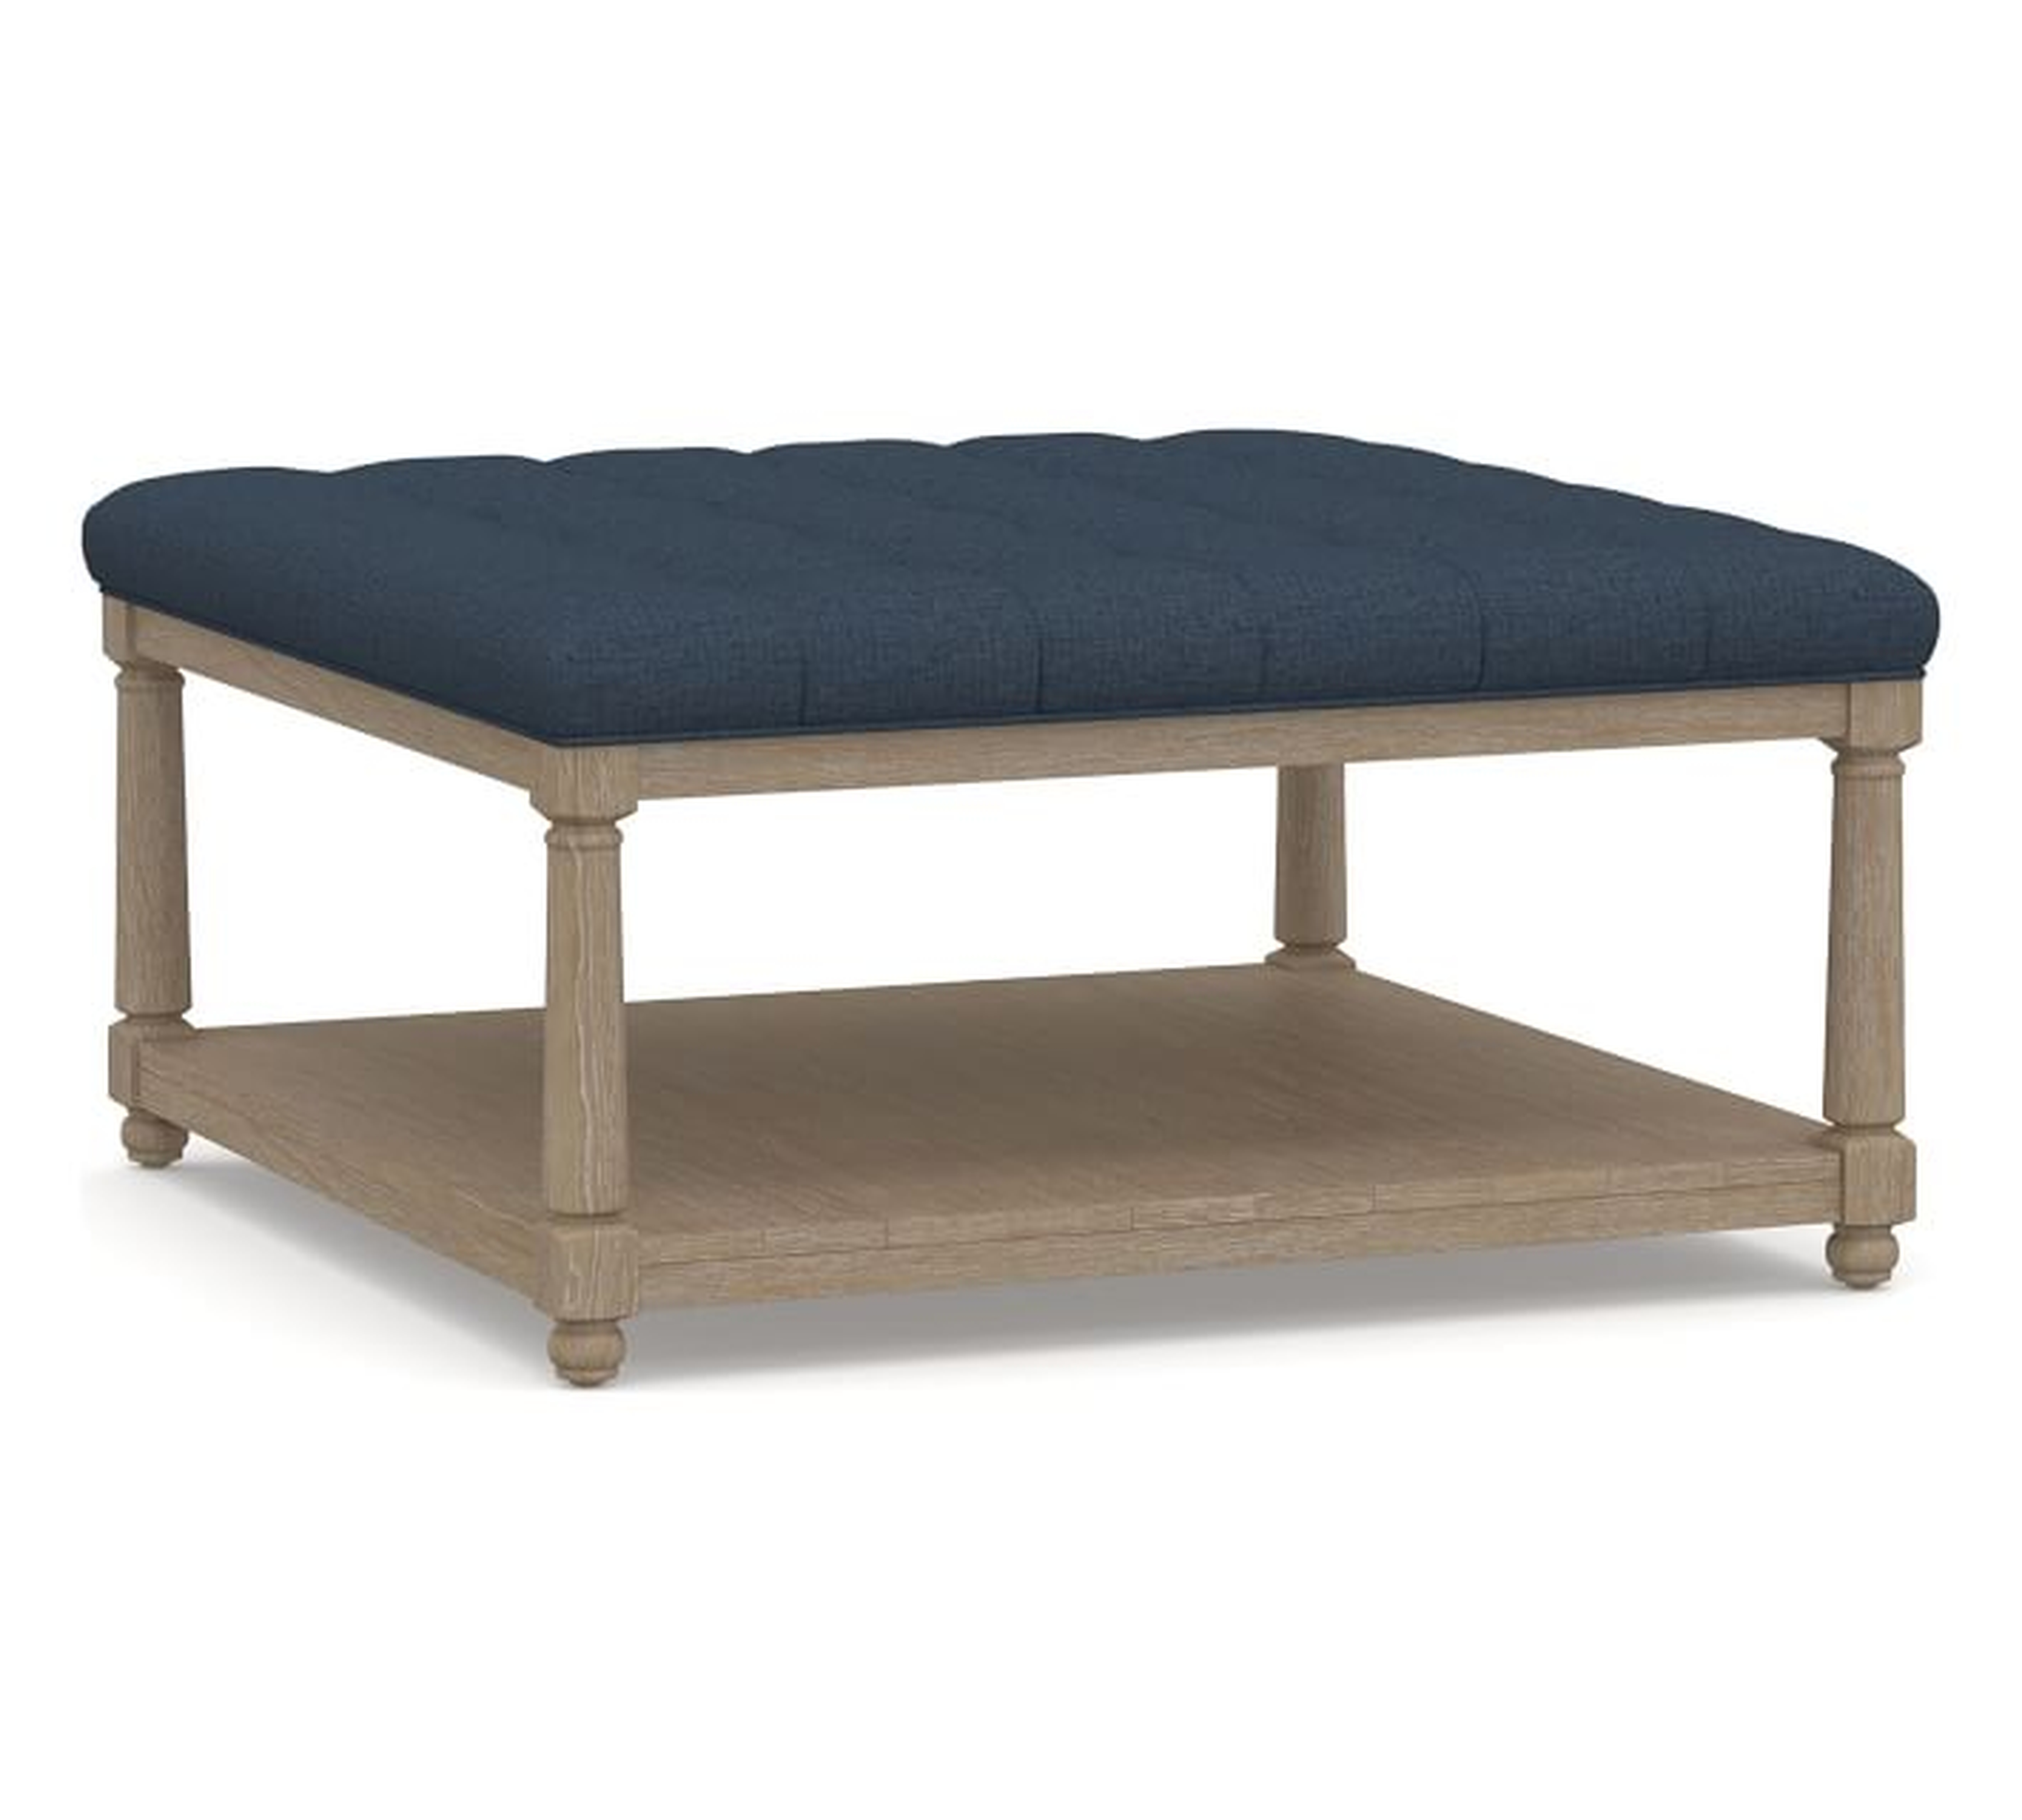 Berlin Upholstered Square Ottoman, Brushed Crossweave Navy - Pottery Barn